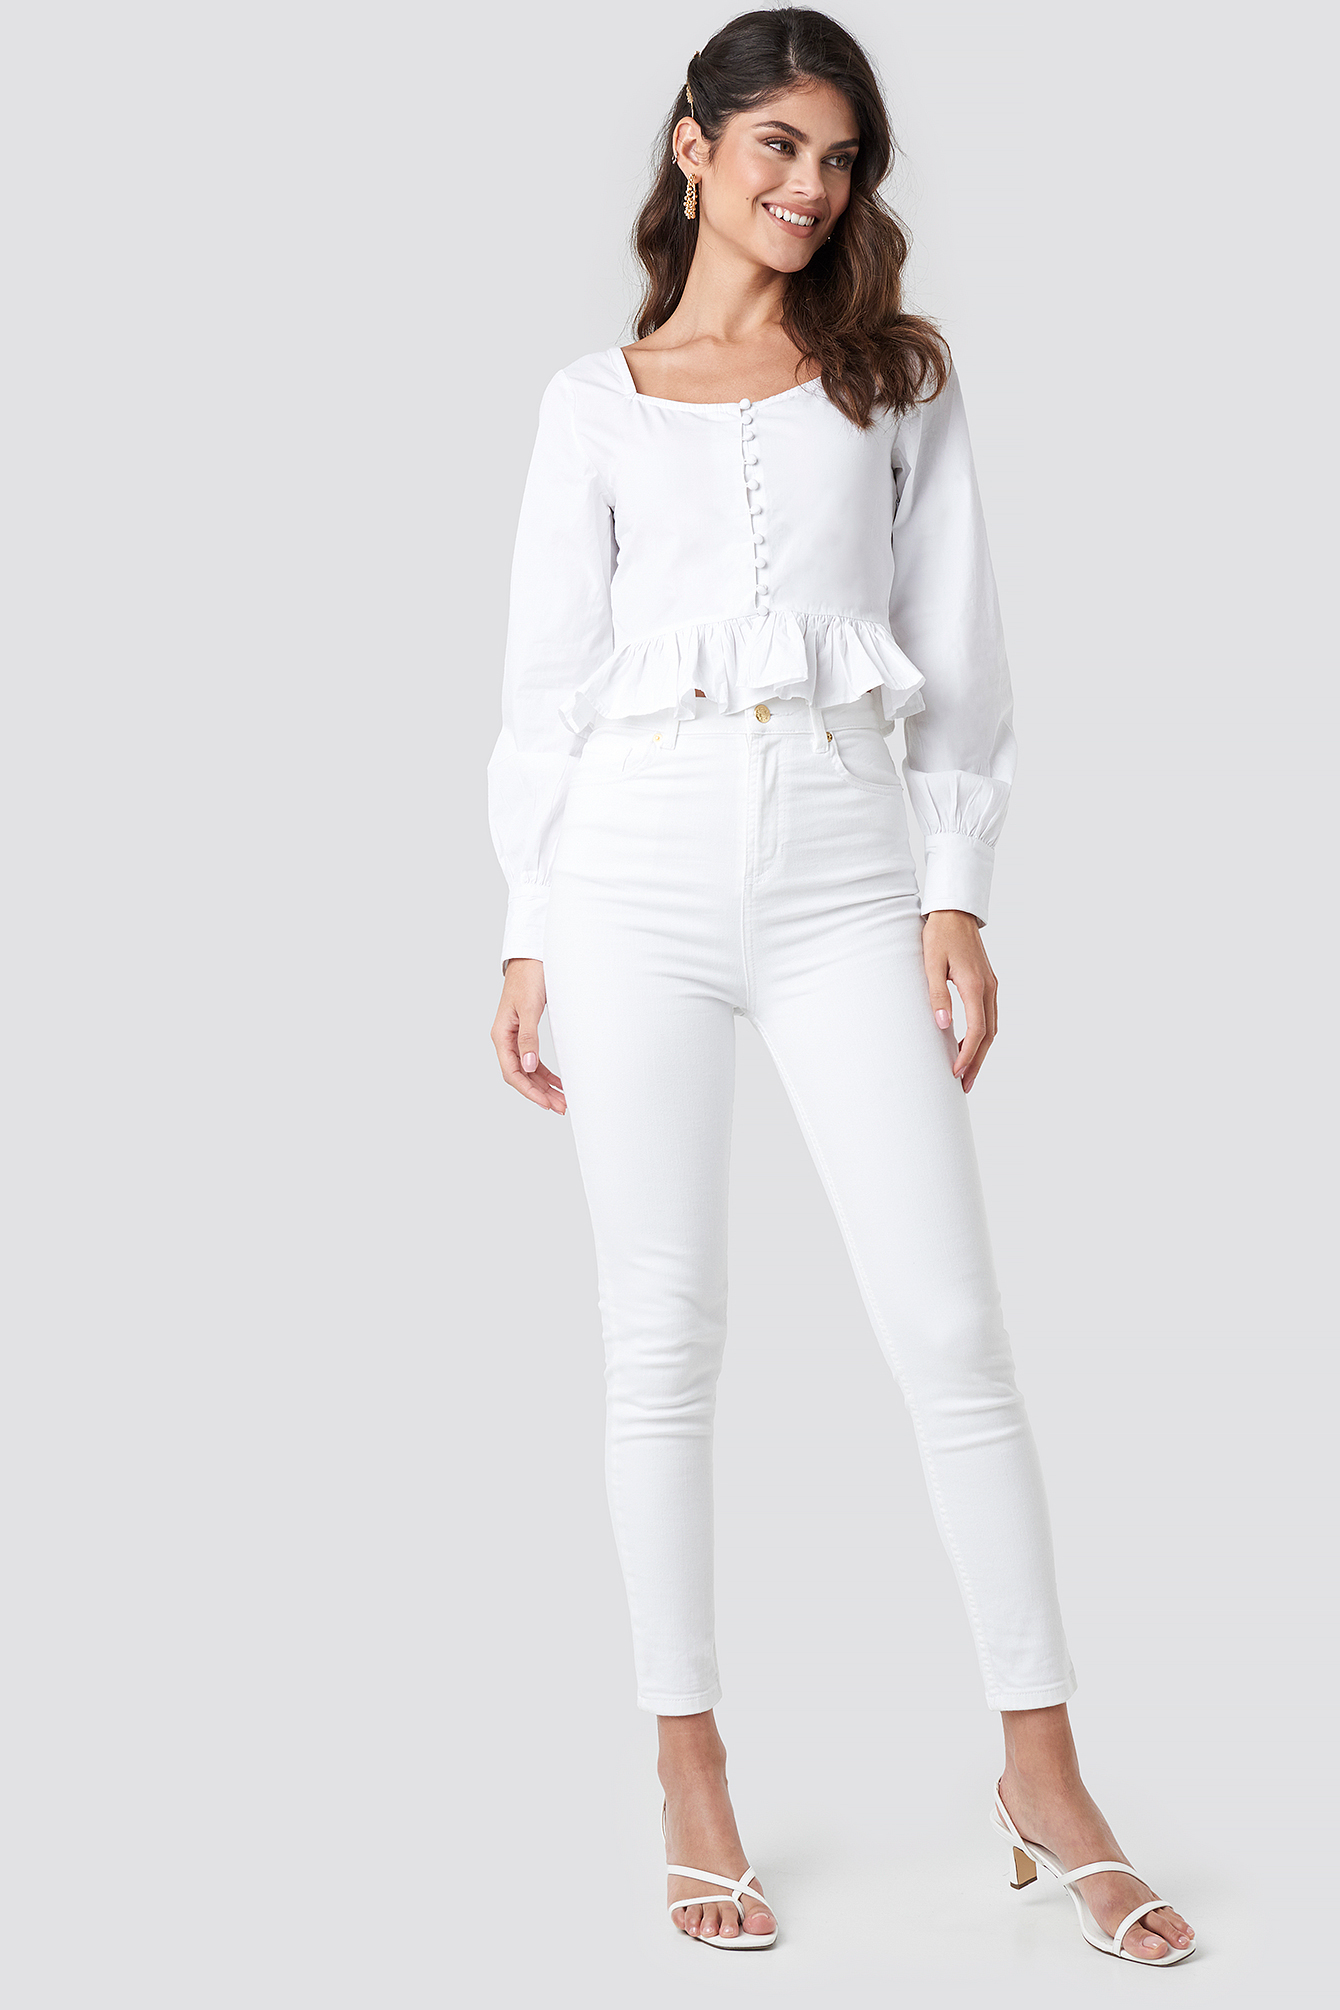 White Frill Detailed Button Up Blouse